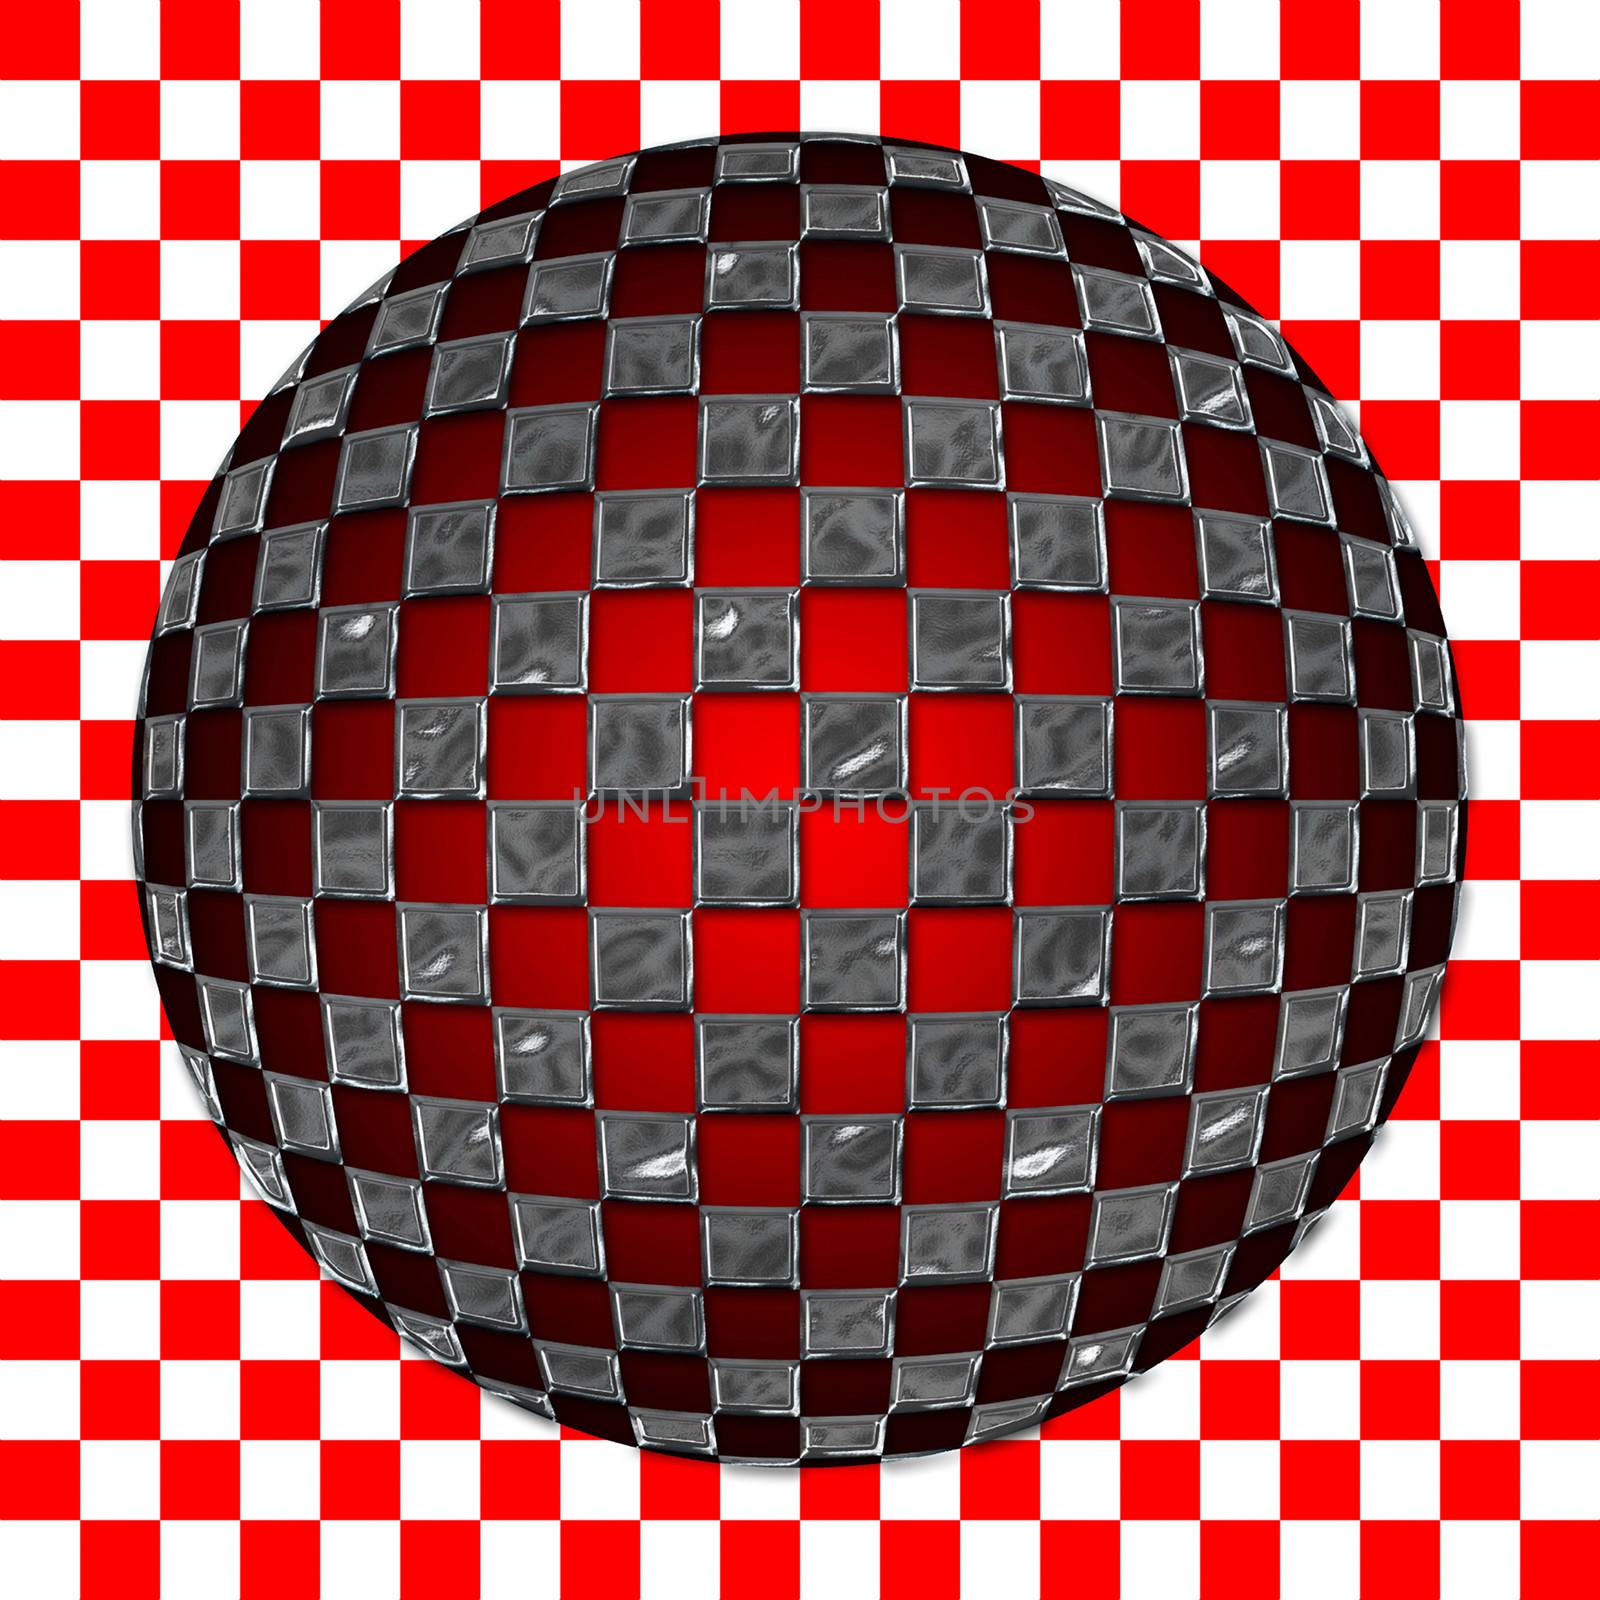 An illustration of a sphere with a checkered texture on a checkered background.